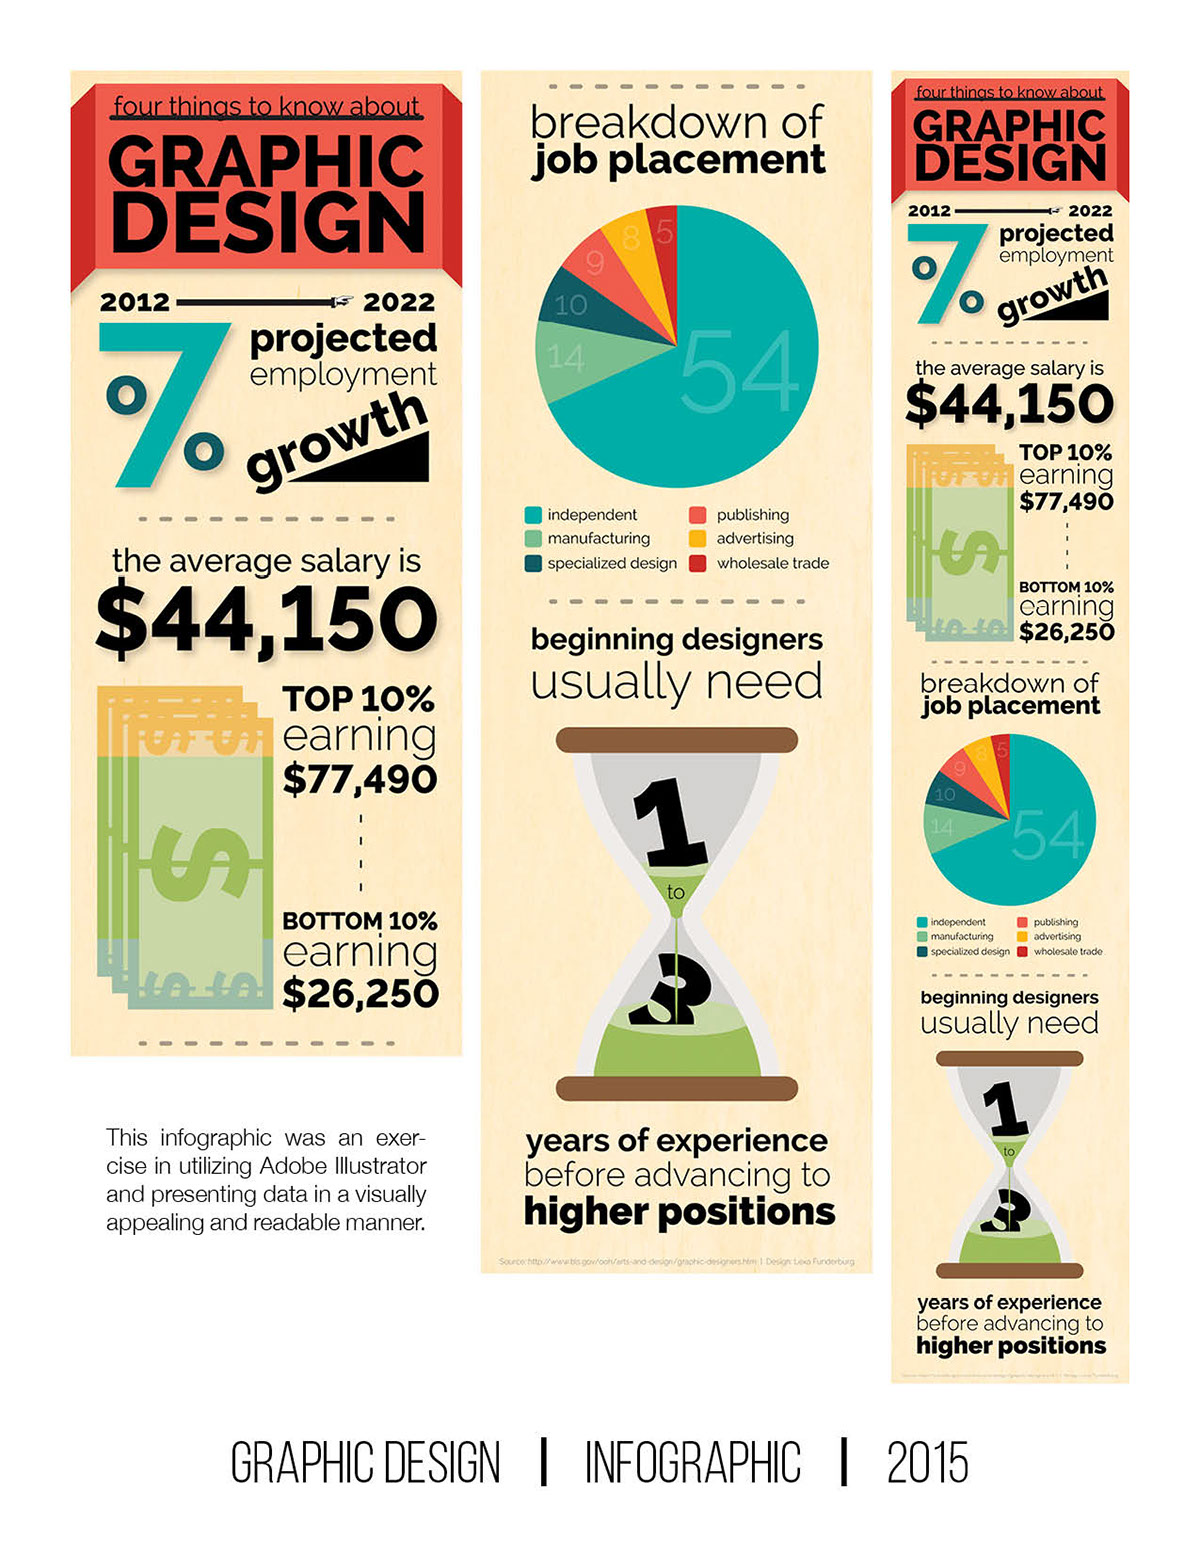 Graphic Design Career infographic on Behance